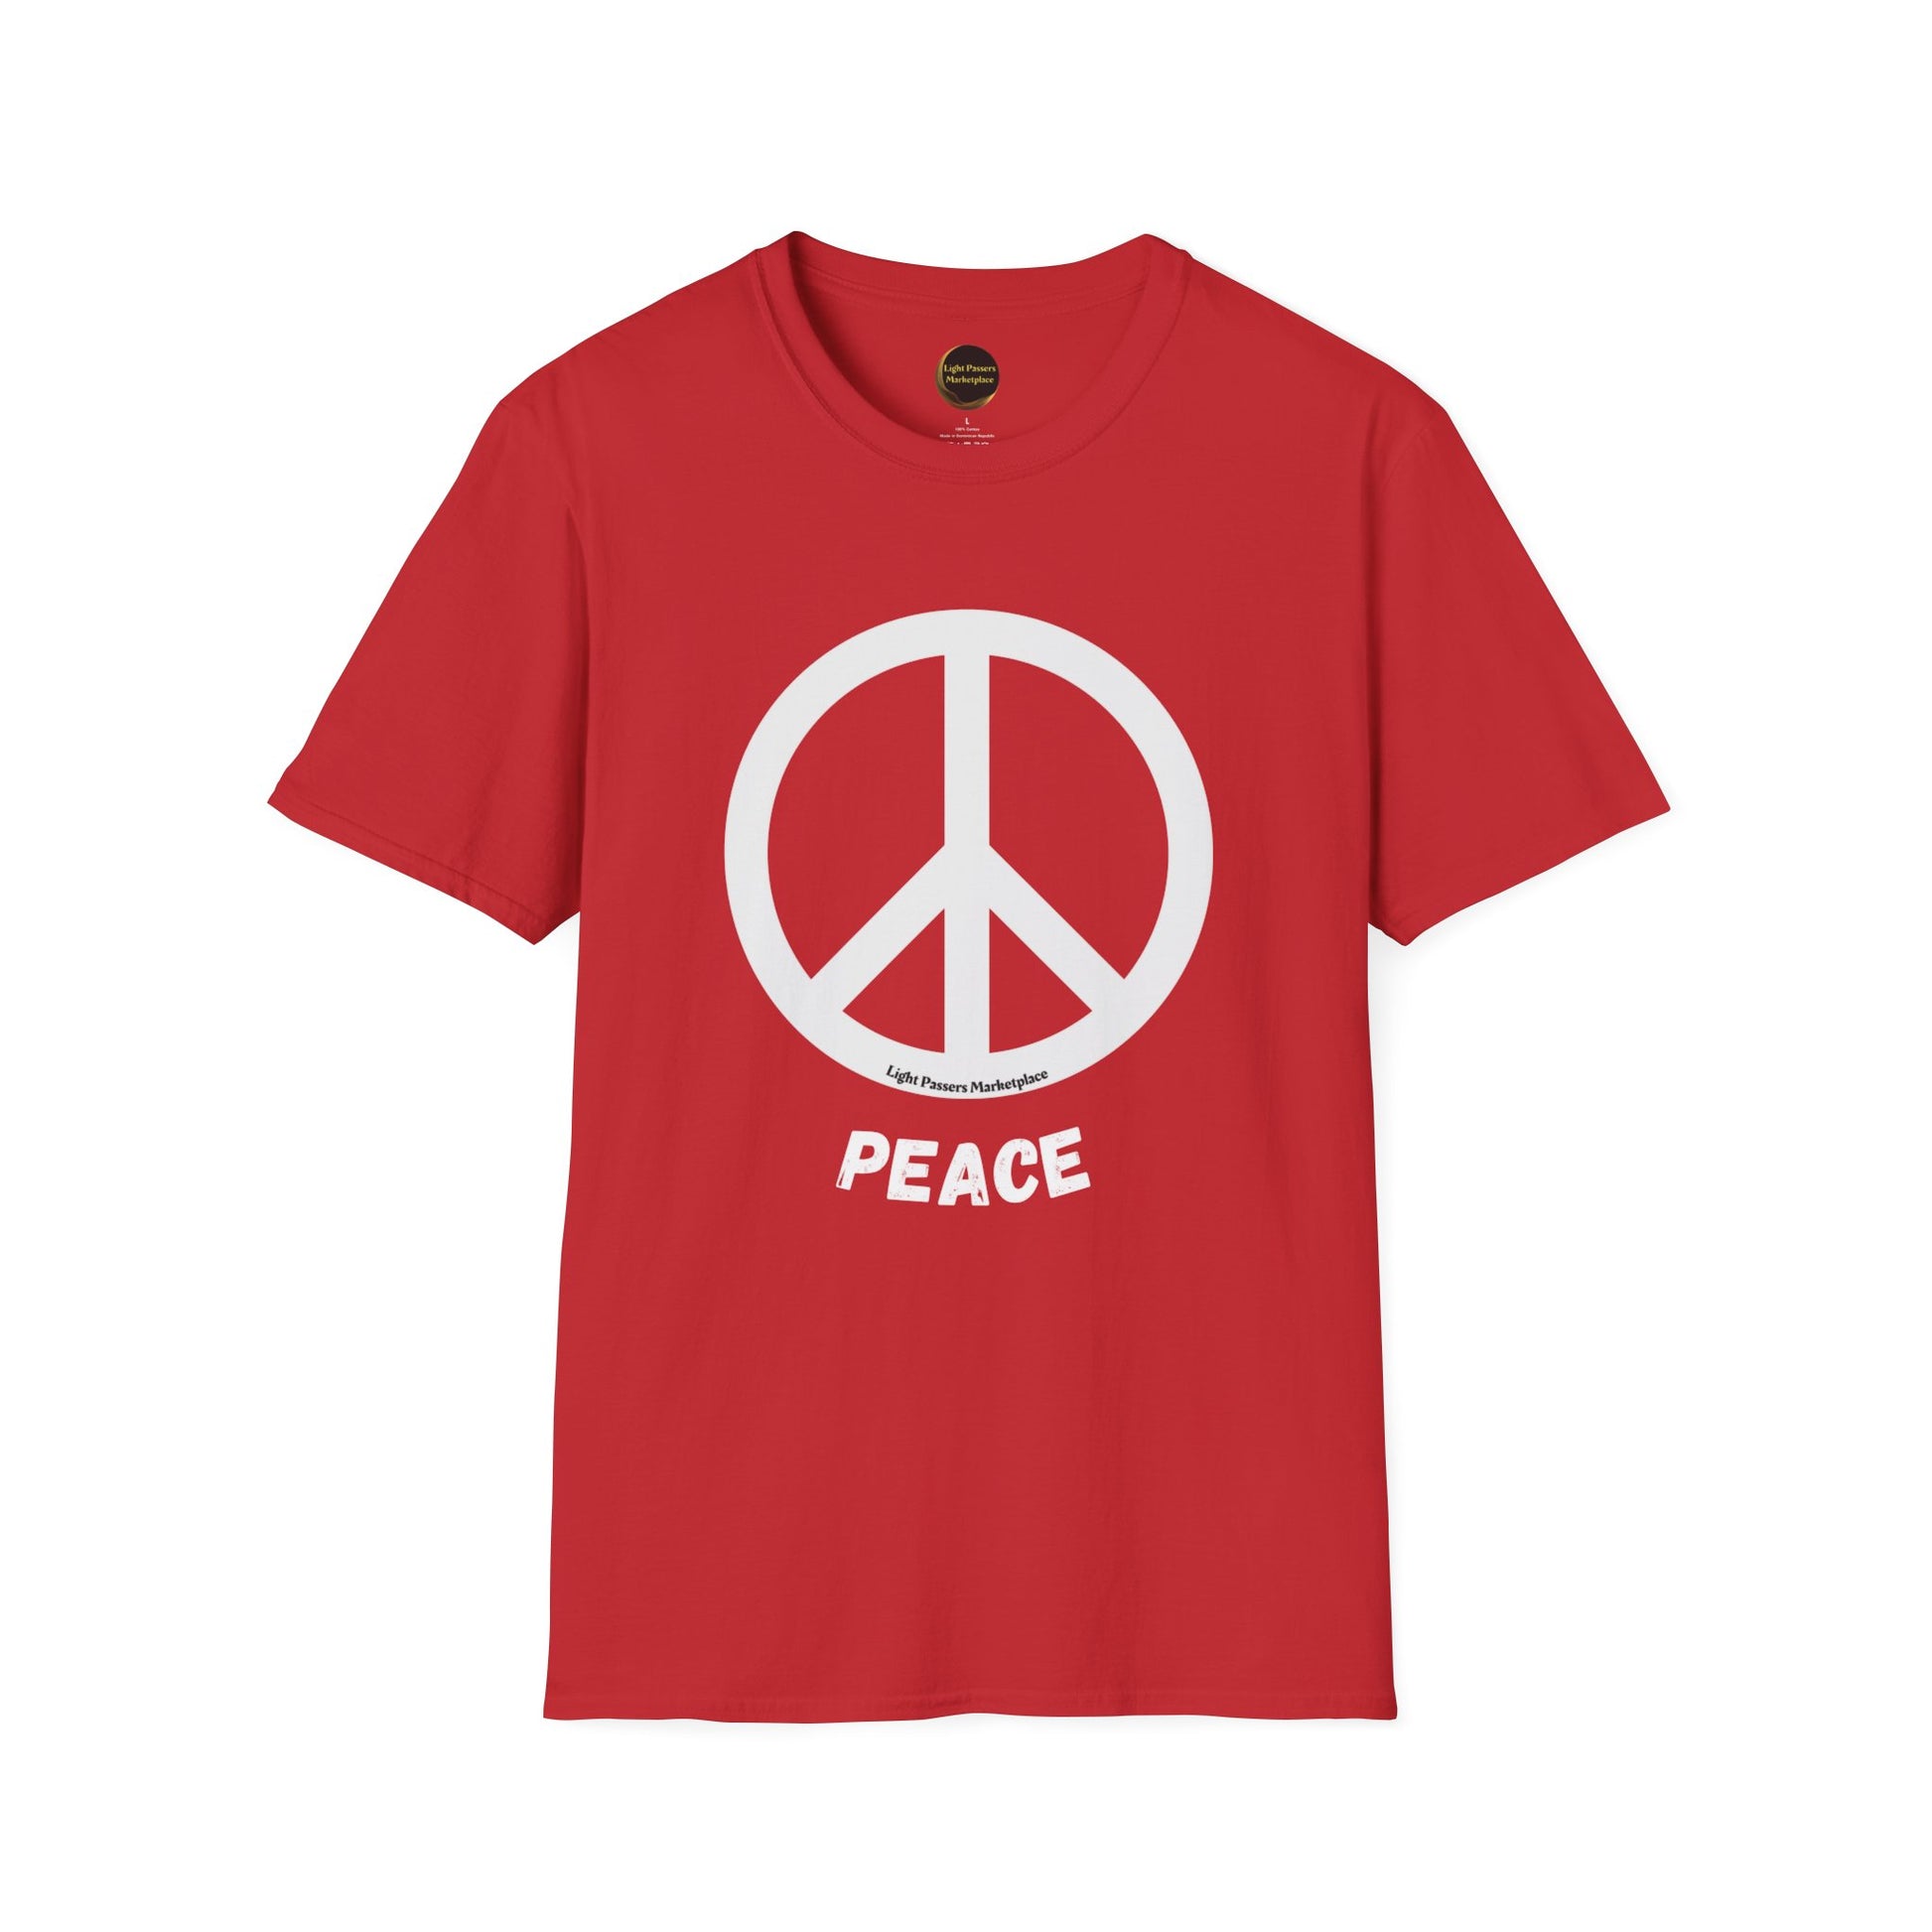 Unisex red t-shirt with peace symbol, made from soft 100% ring-spun cotton. Features twill tape shoulders, ribbed collar, and tear-away label for comfort. Ethically produced by Gildan.